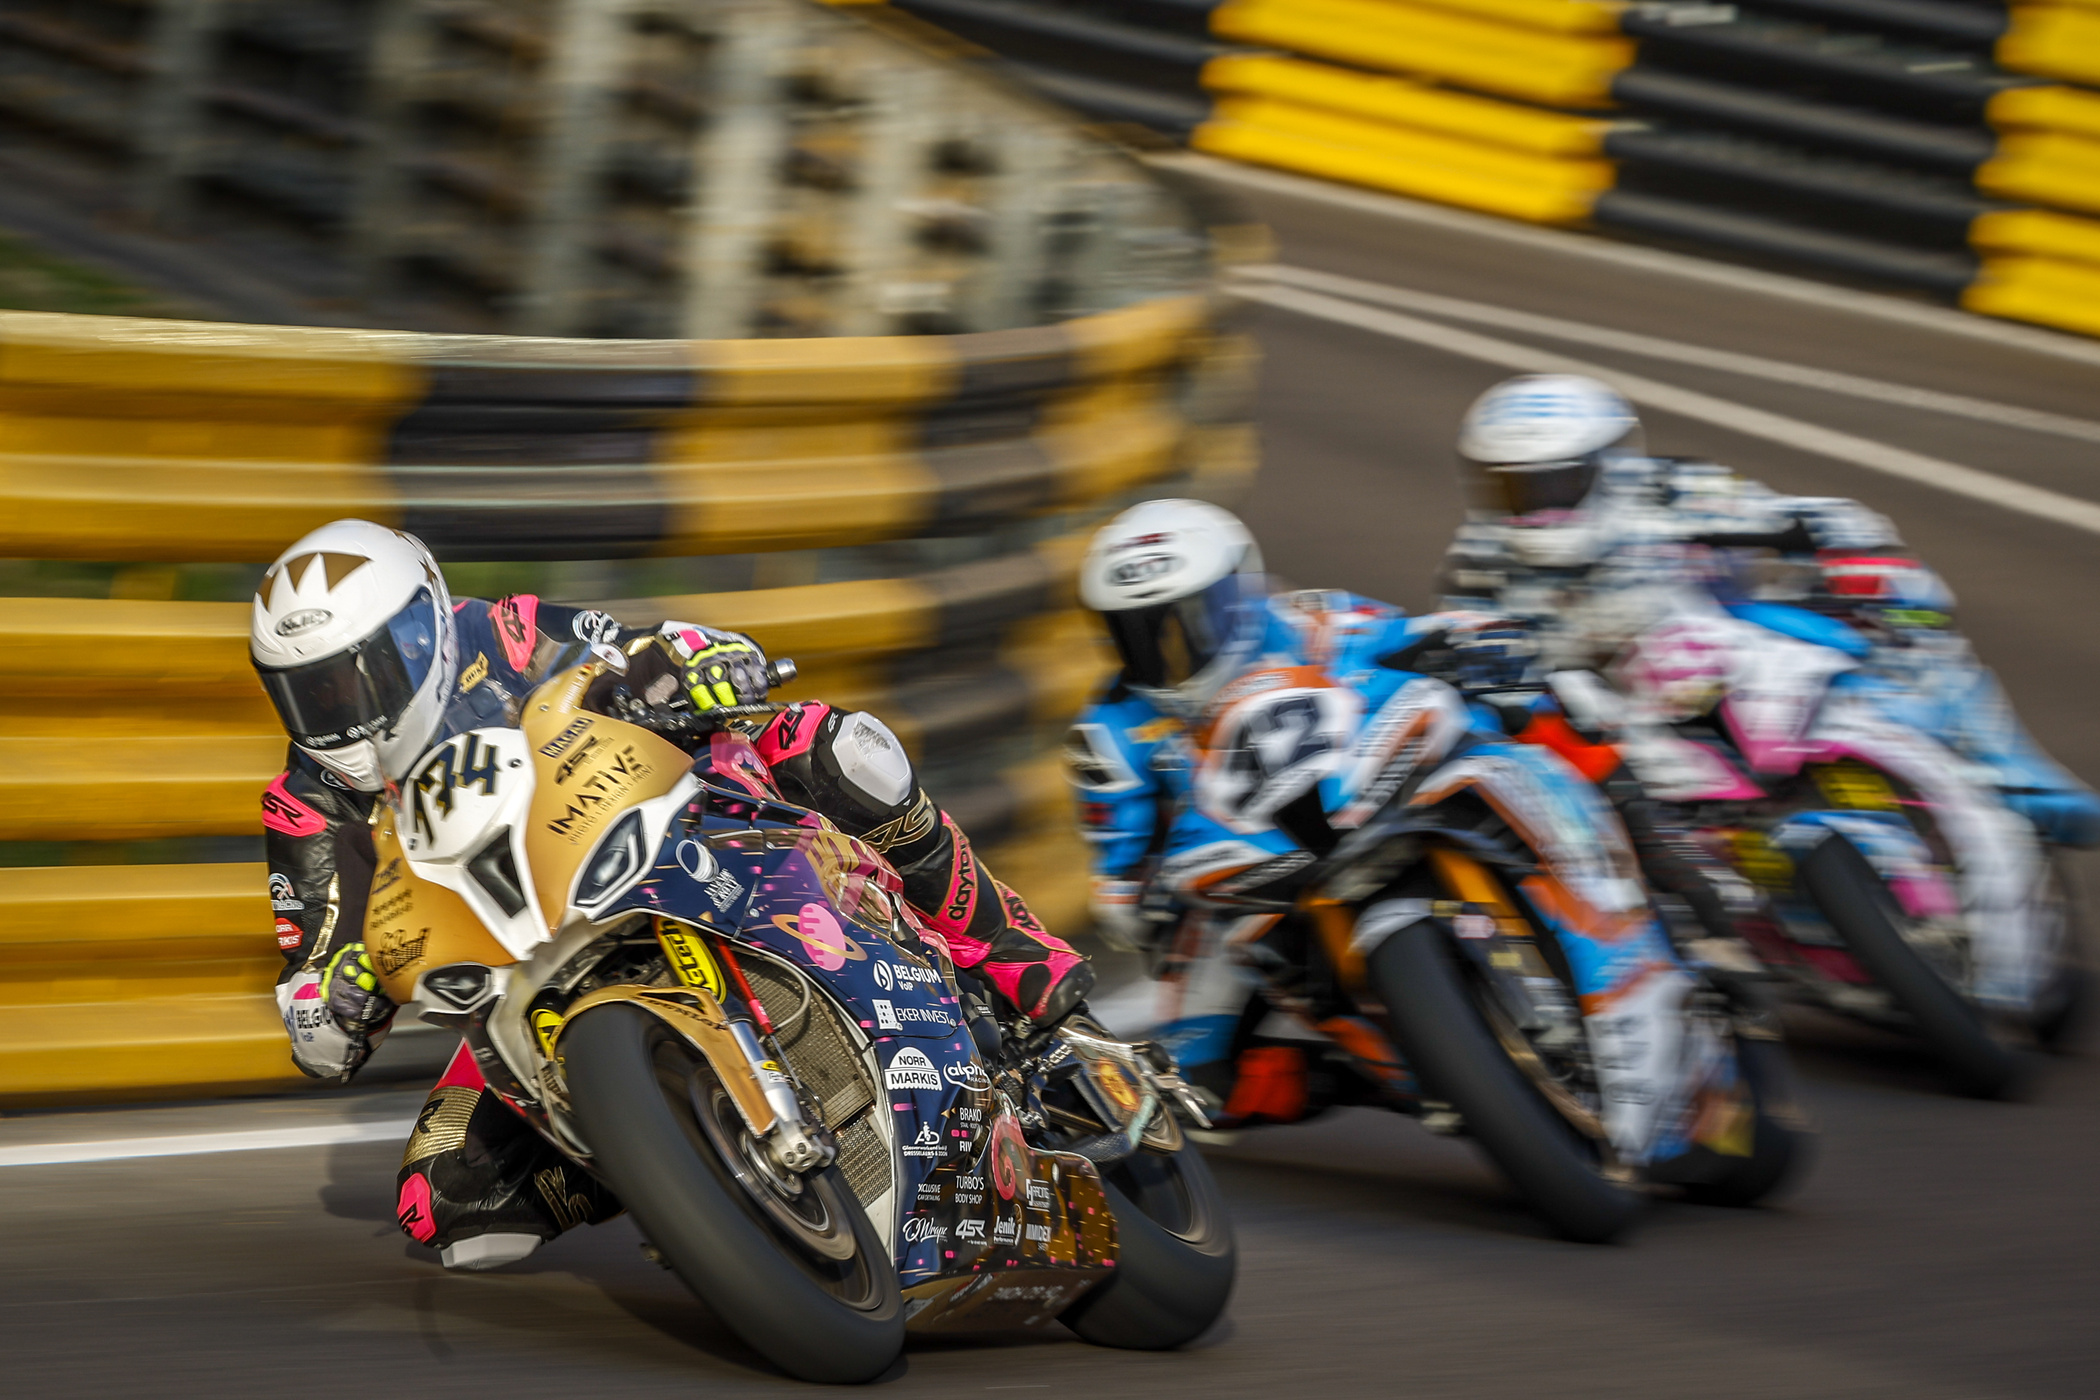 Motorcycle Grand Prix ready to highlight this year's Macau GP